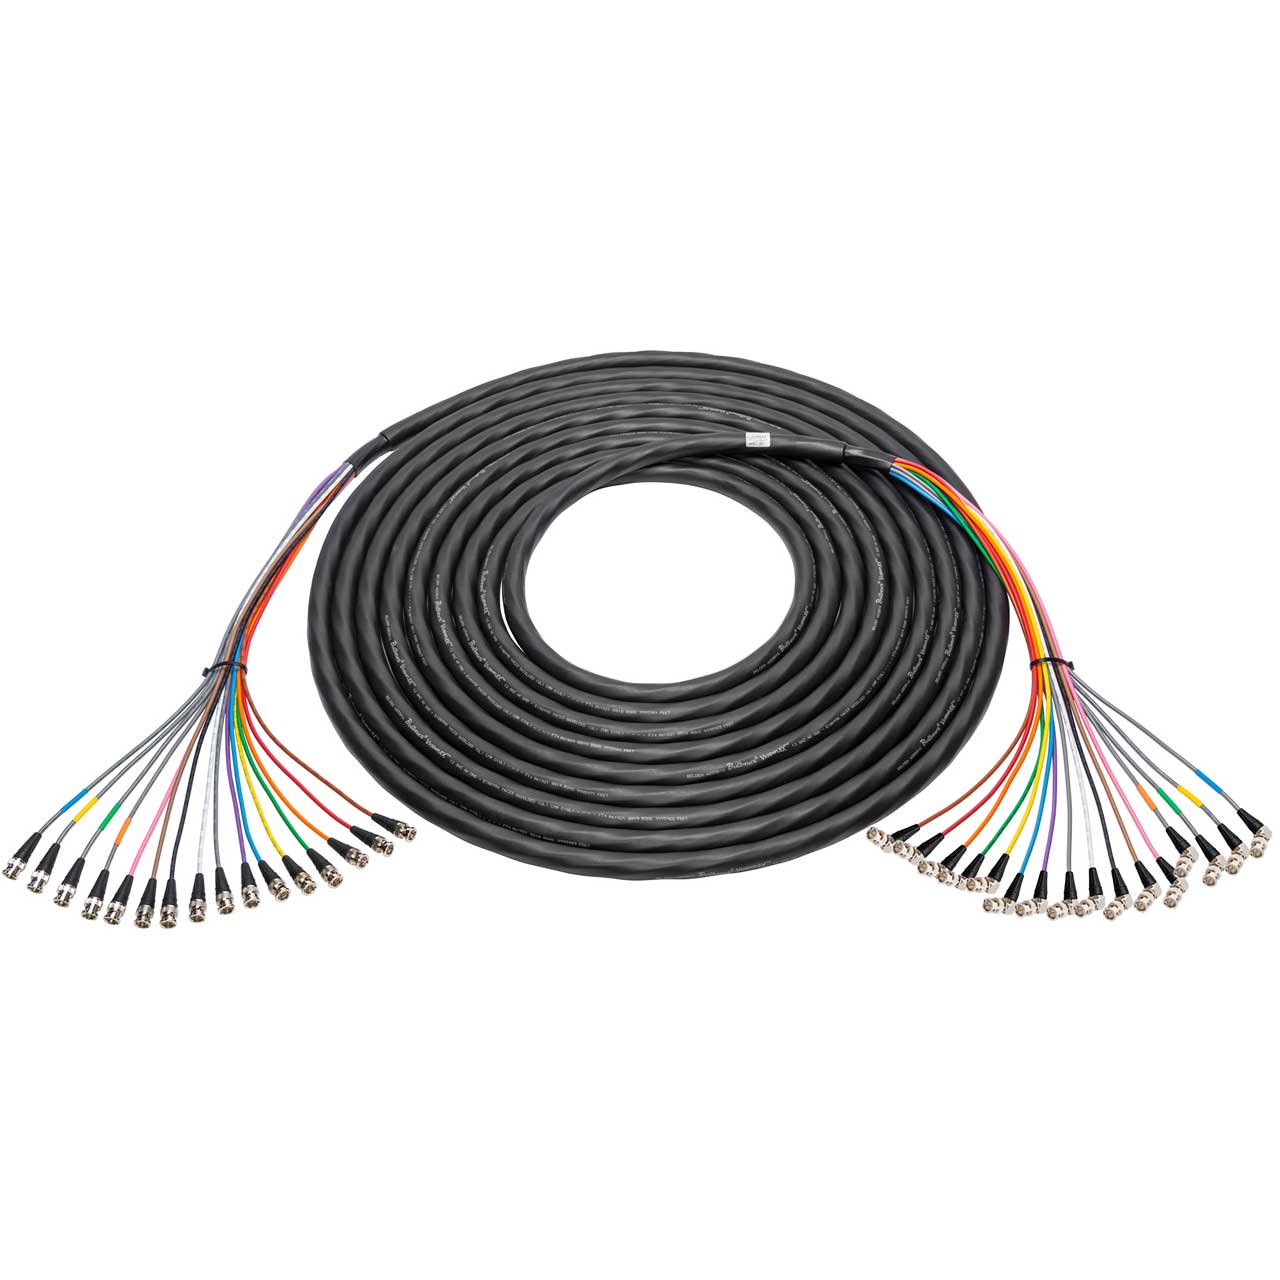 Laird 4855R16-BBA-125 16-Channel 12G-SDI/4K UHD BNC Male to Right Angle BNC Male Snake Cable - 125 Foot 4855R16-BBA-125